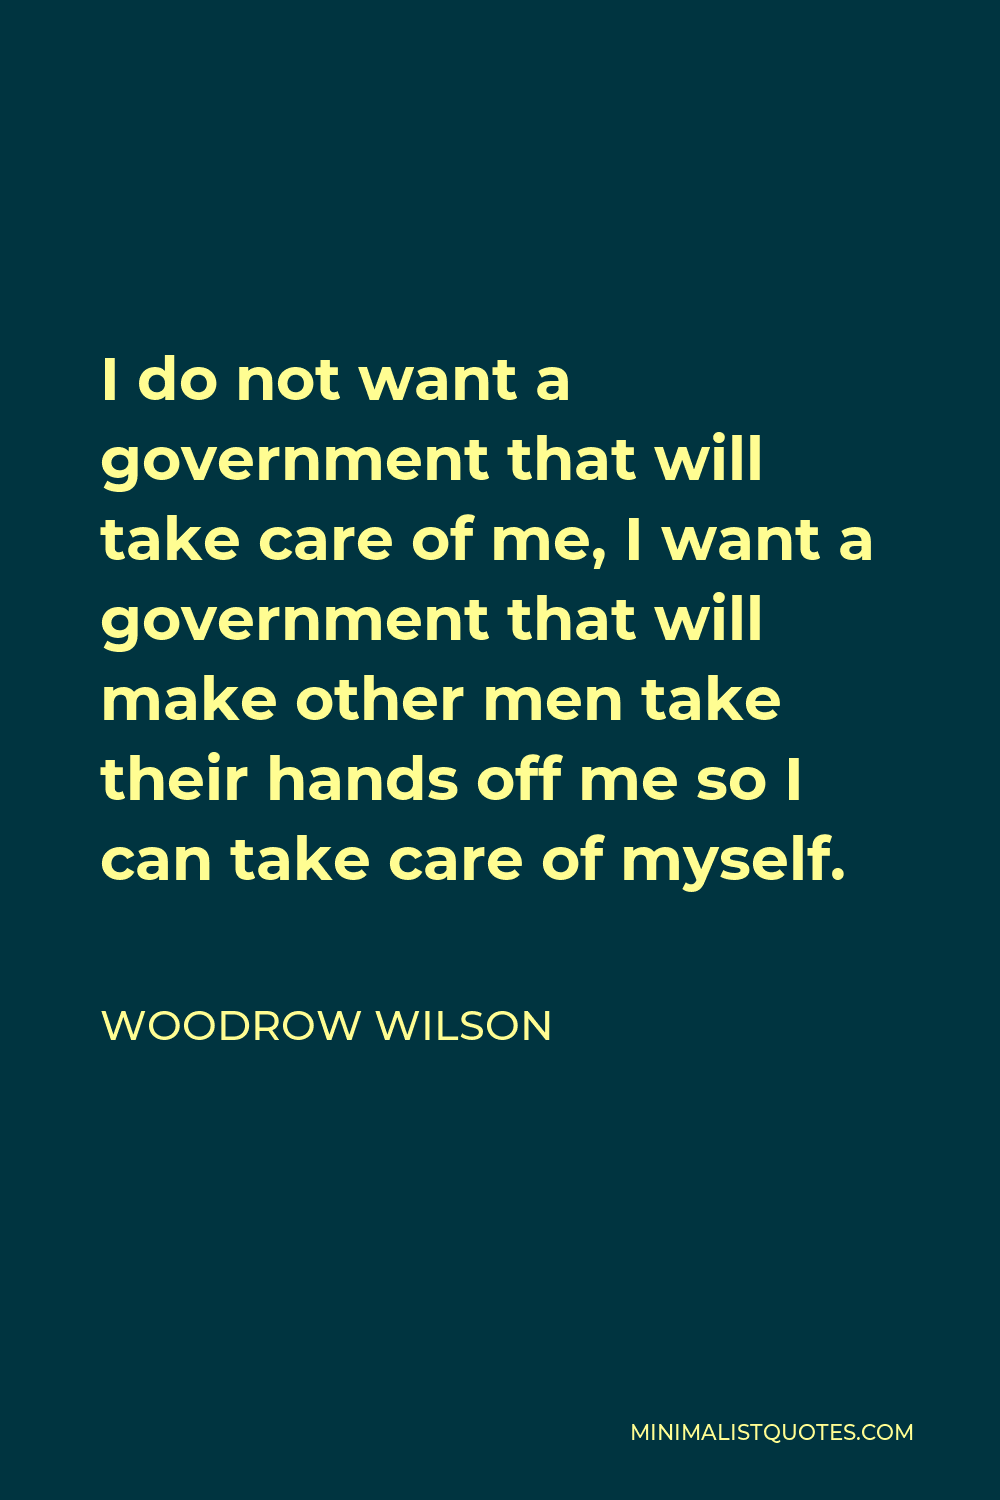 Woodrow Wilson Quote - I do not want a government that will take care of me, I want a government that will make other men take their hands off me so I can take care of myself.